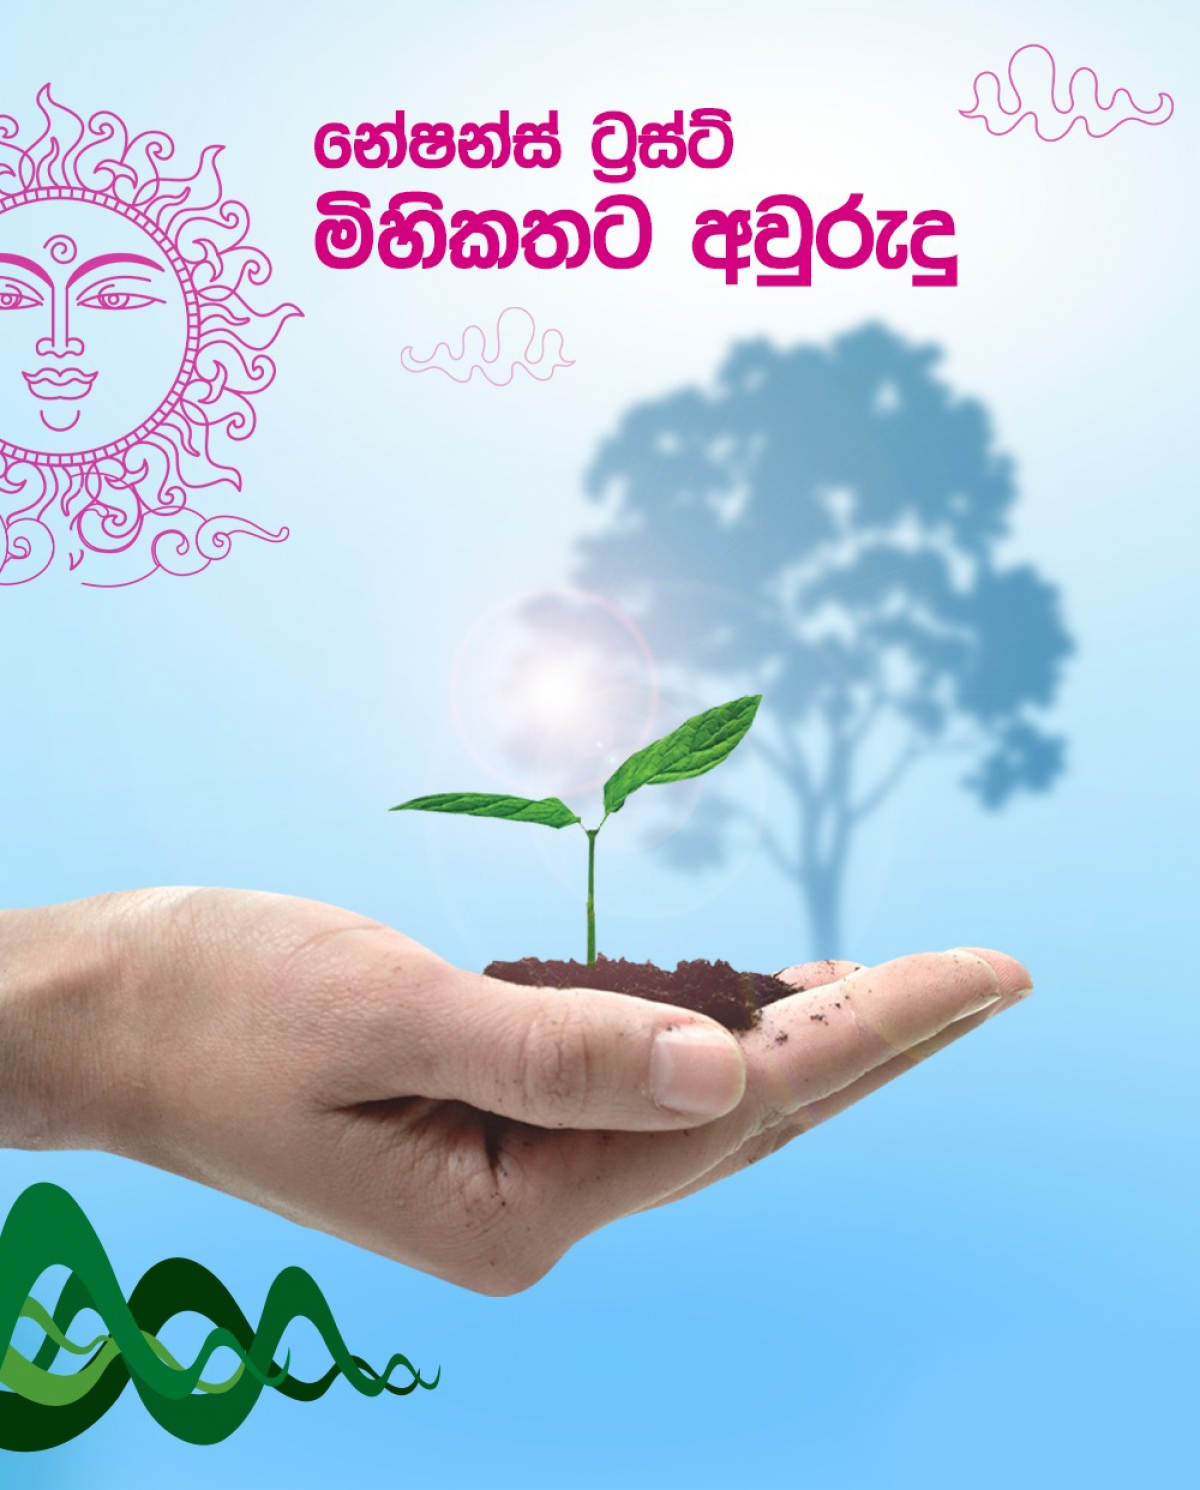 Nations Trust Bank celebrates this Sinhala and Tamil New Year with ‘Mihikathata Avurudu’